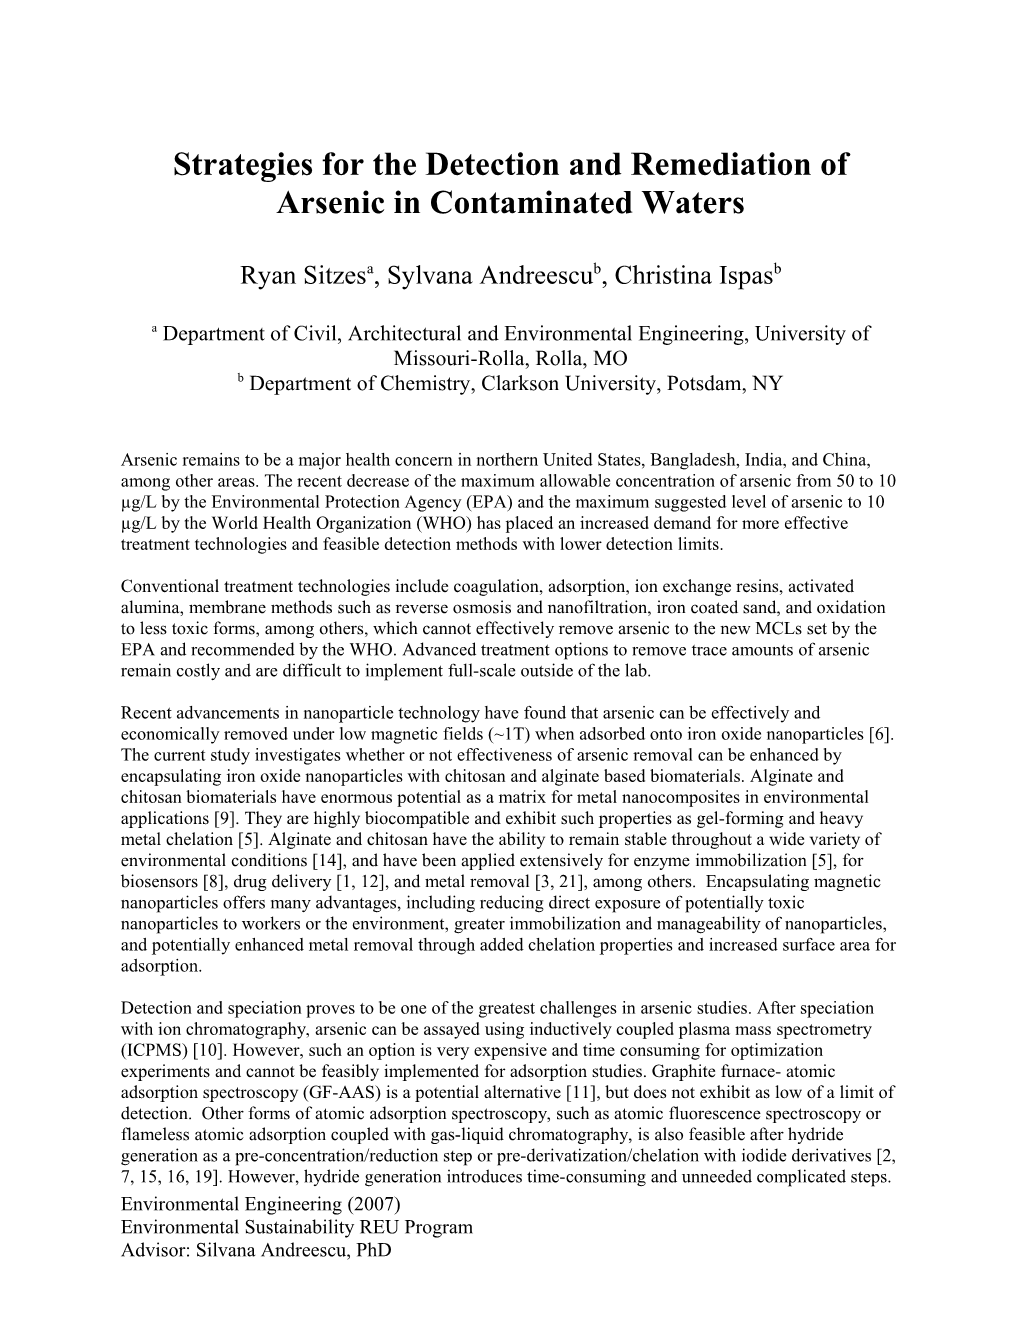 Strategies for the Detection and Remediation of Arsenic in Contaminated Waters